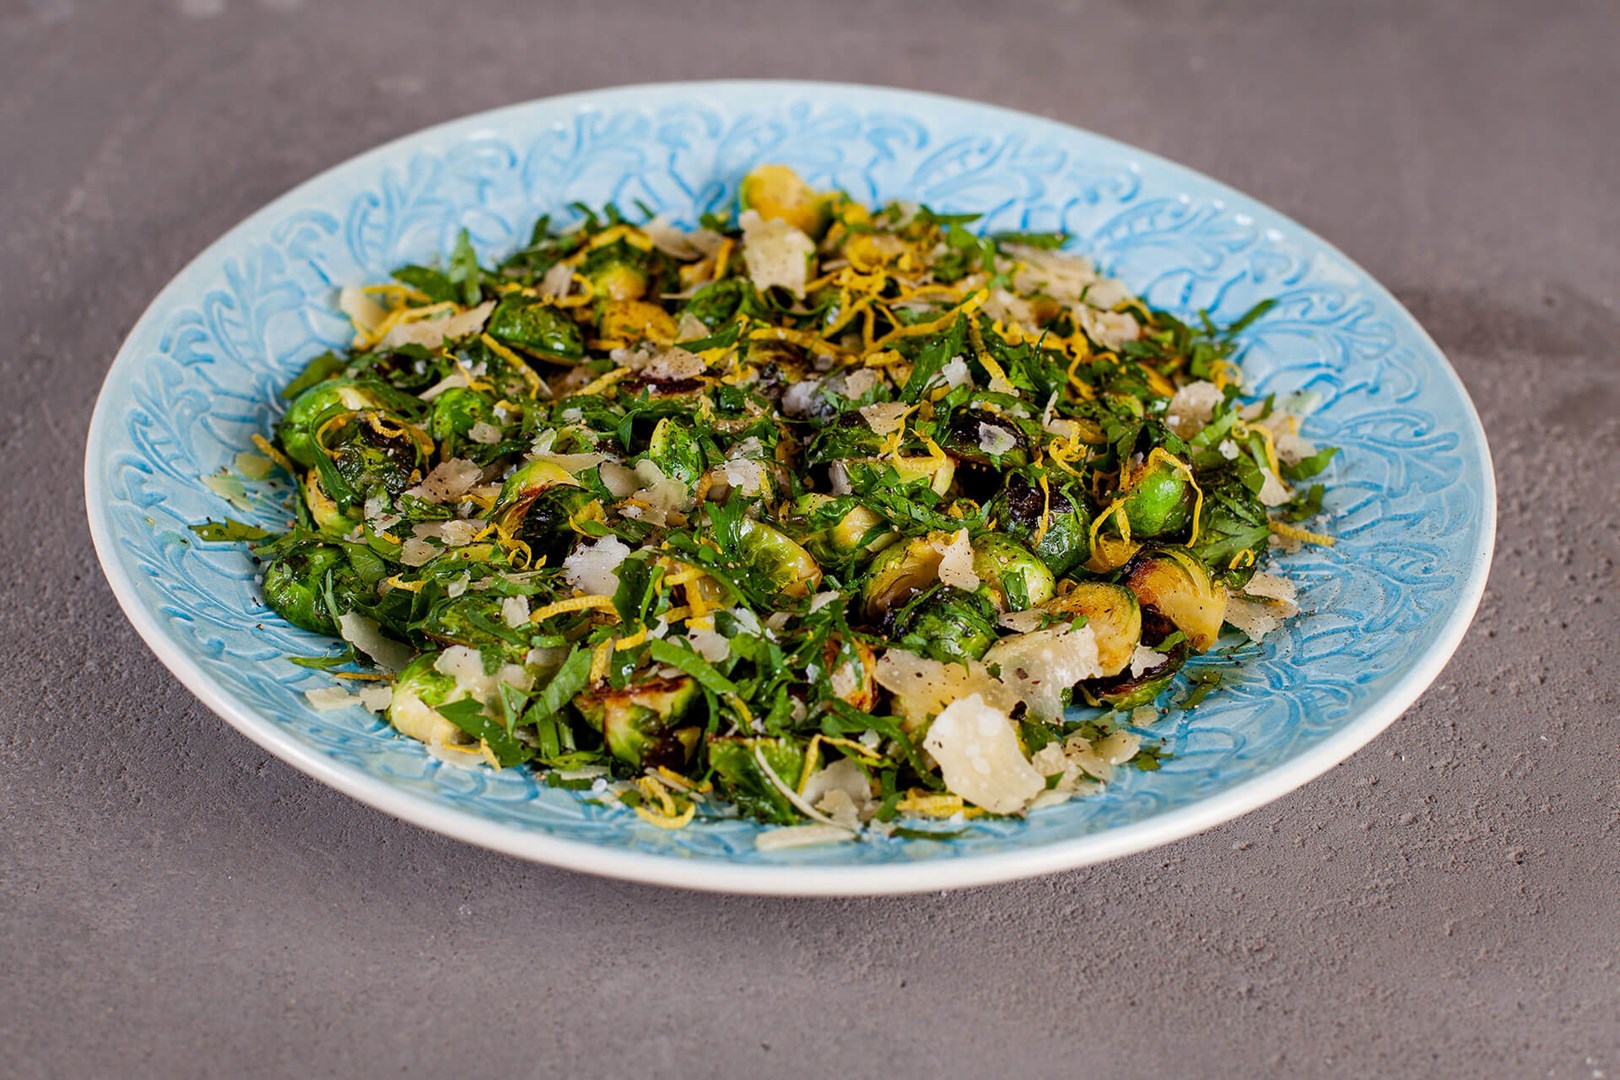 Fried brussels sprouts with gremolata and parmesan on a blue serving dish